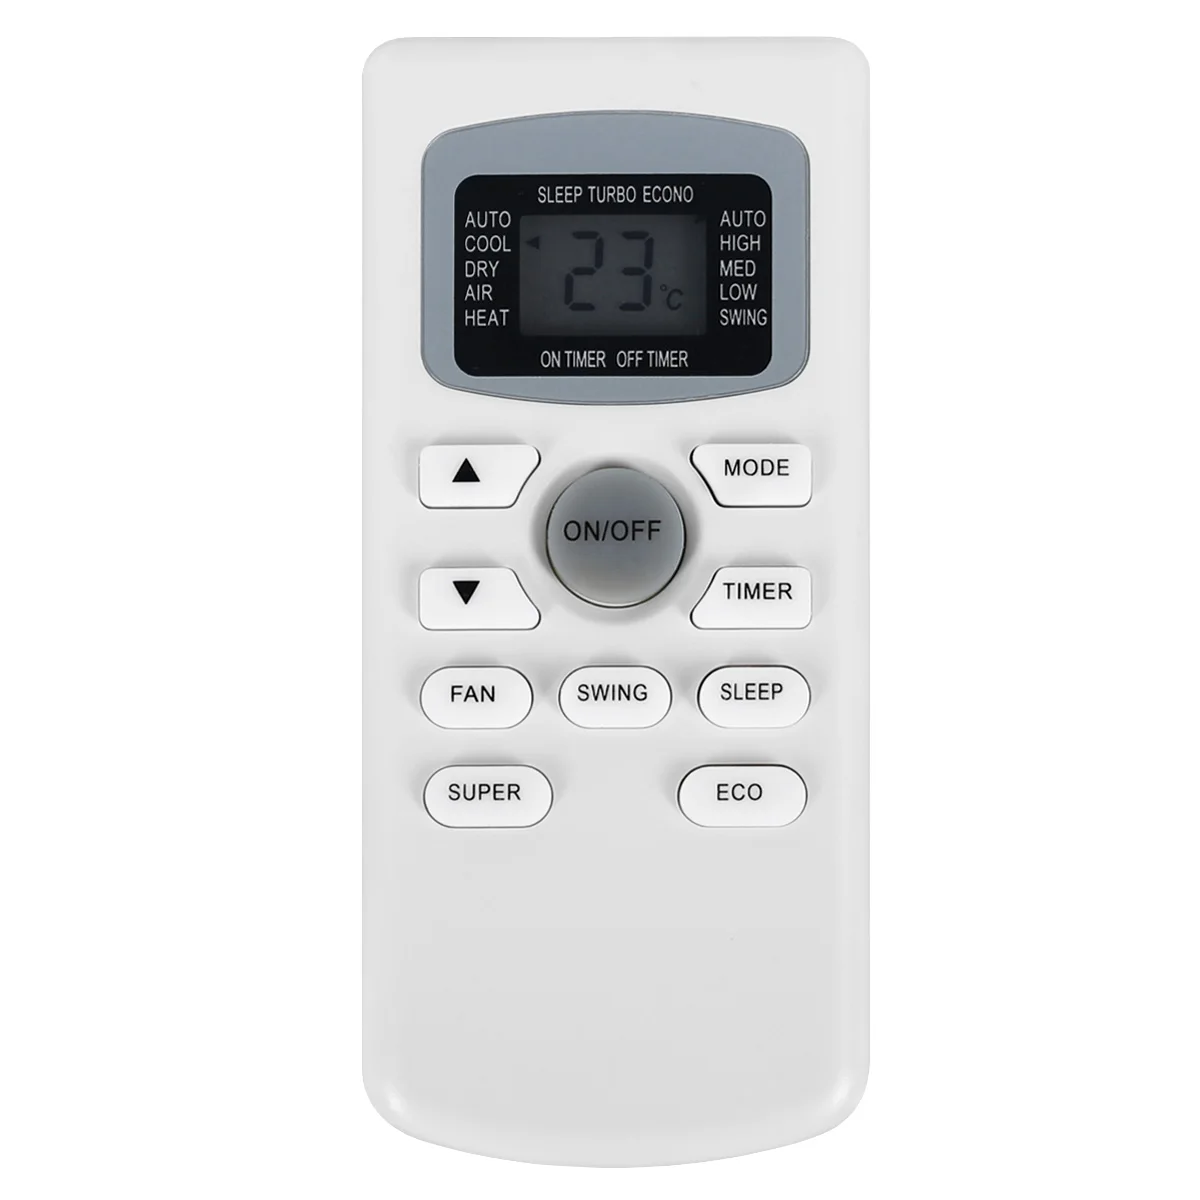 

A/C controller Air Conditioner air conditioning remote control suitable for tcl GYKQ-34 GYKQ-47 KT-TL1 KFR-23GW KTTCL003